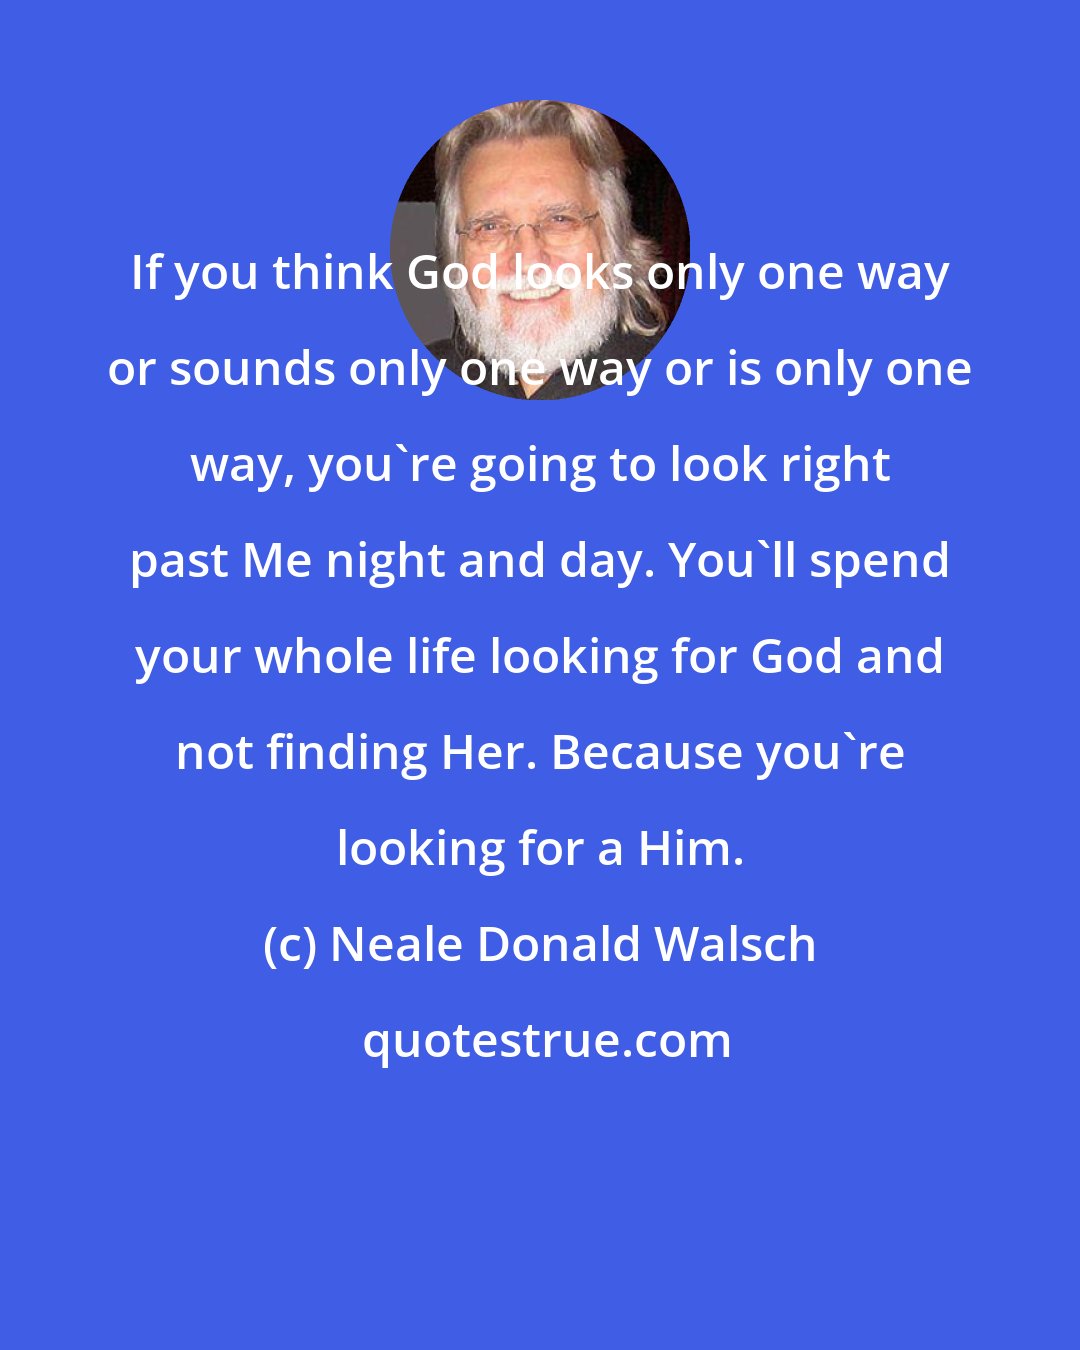 Neale Donald Walsch: If you think God looks only one way or sounds only one way or is only one way, you're going to look right past Me night and day. You'll spend your whole life looking for God and not finding Her. Because you're looking for a Him.